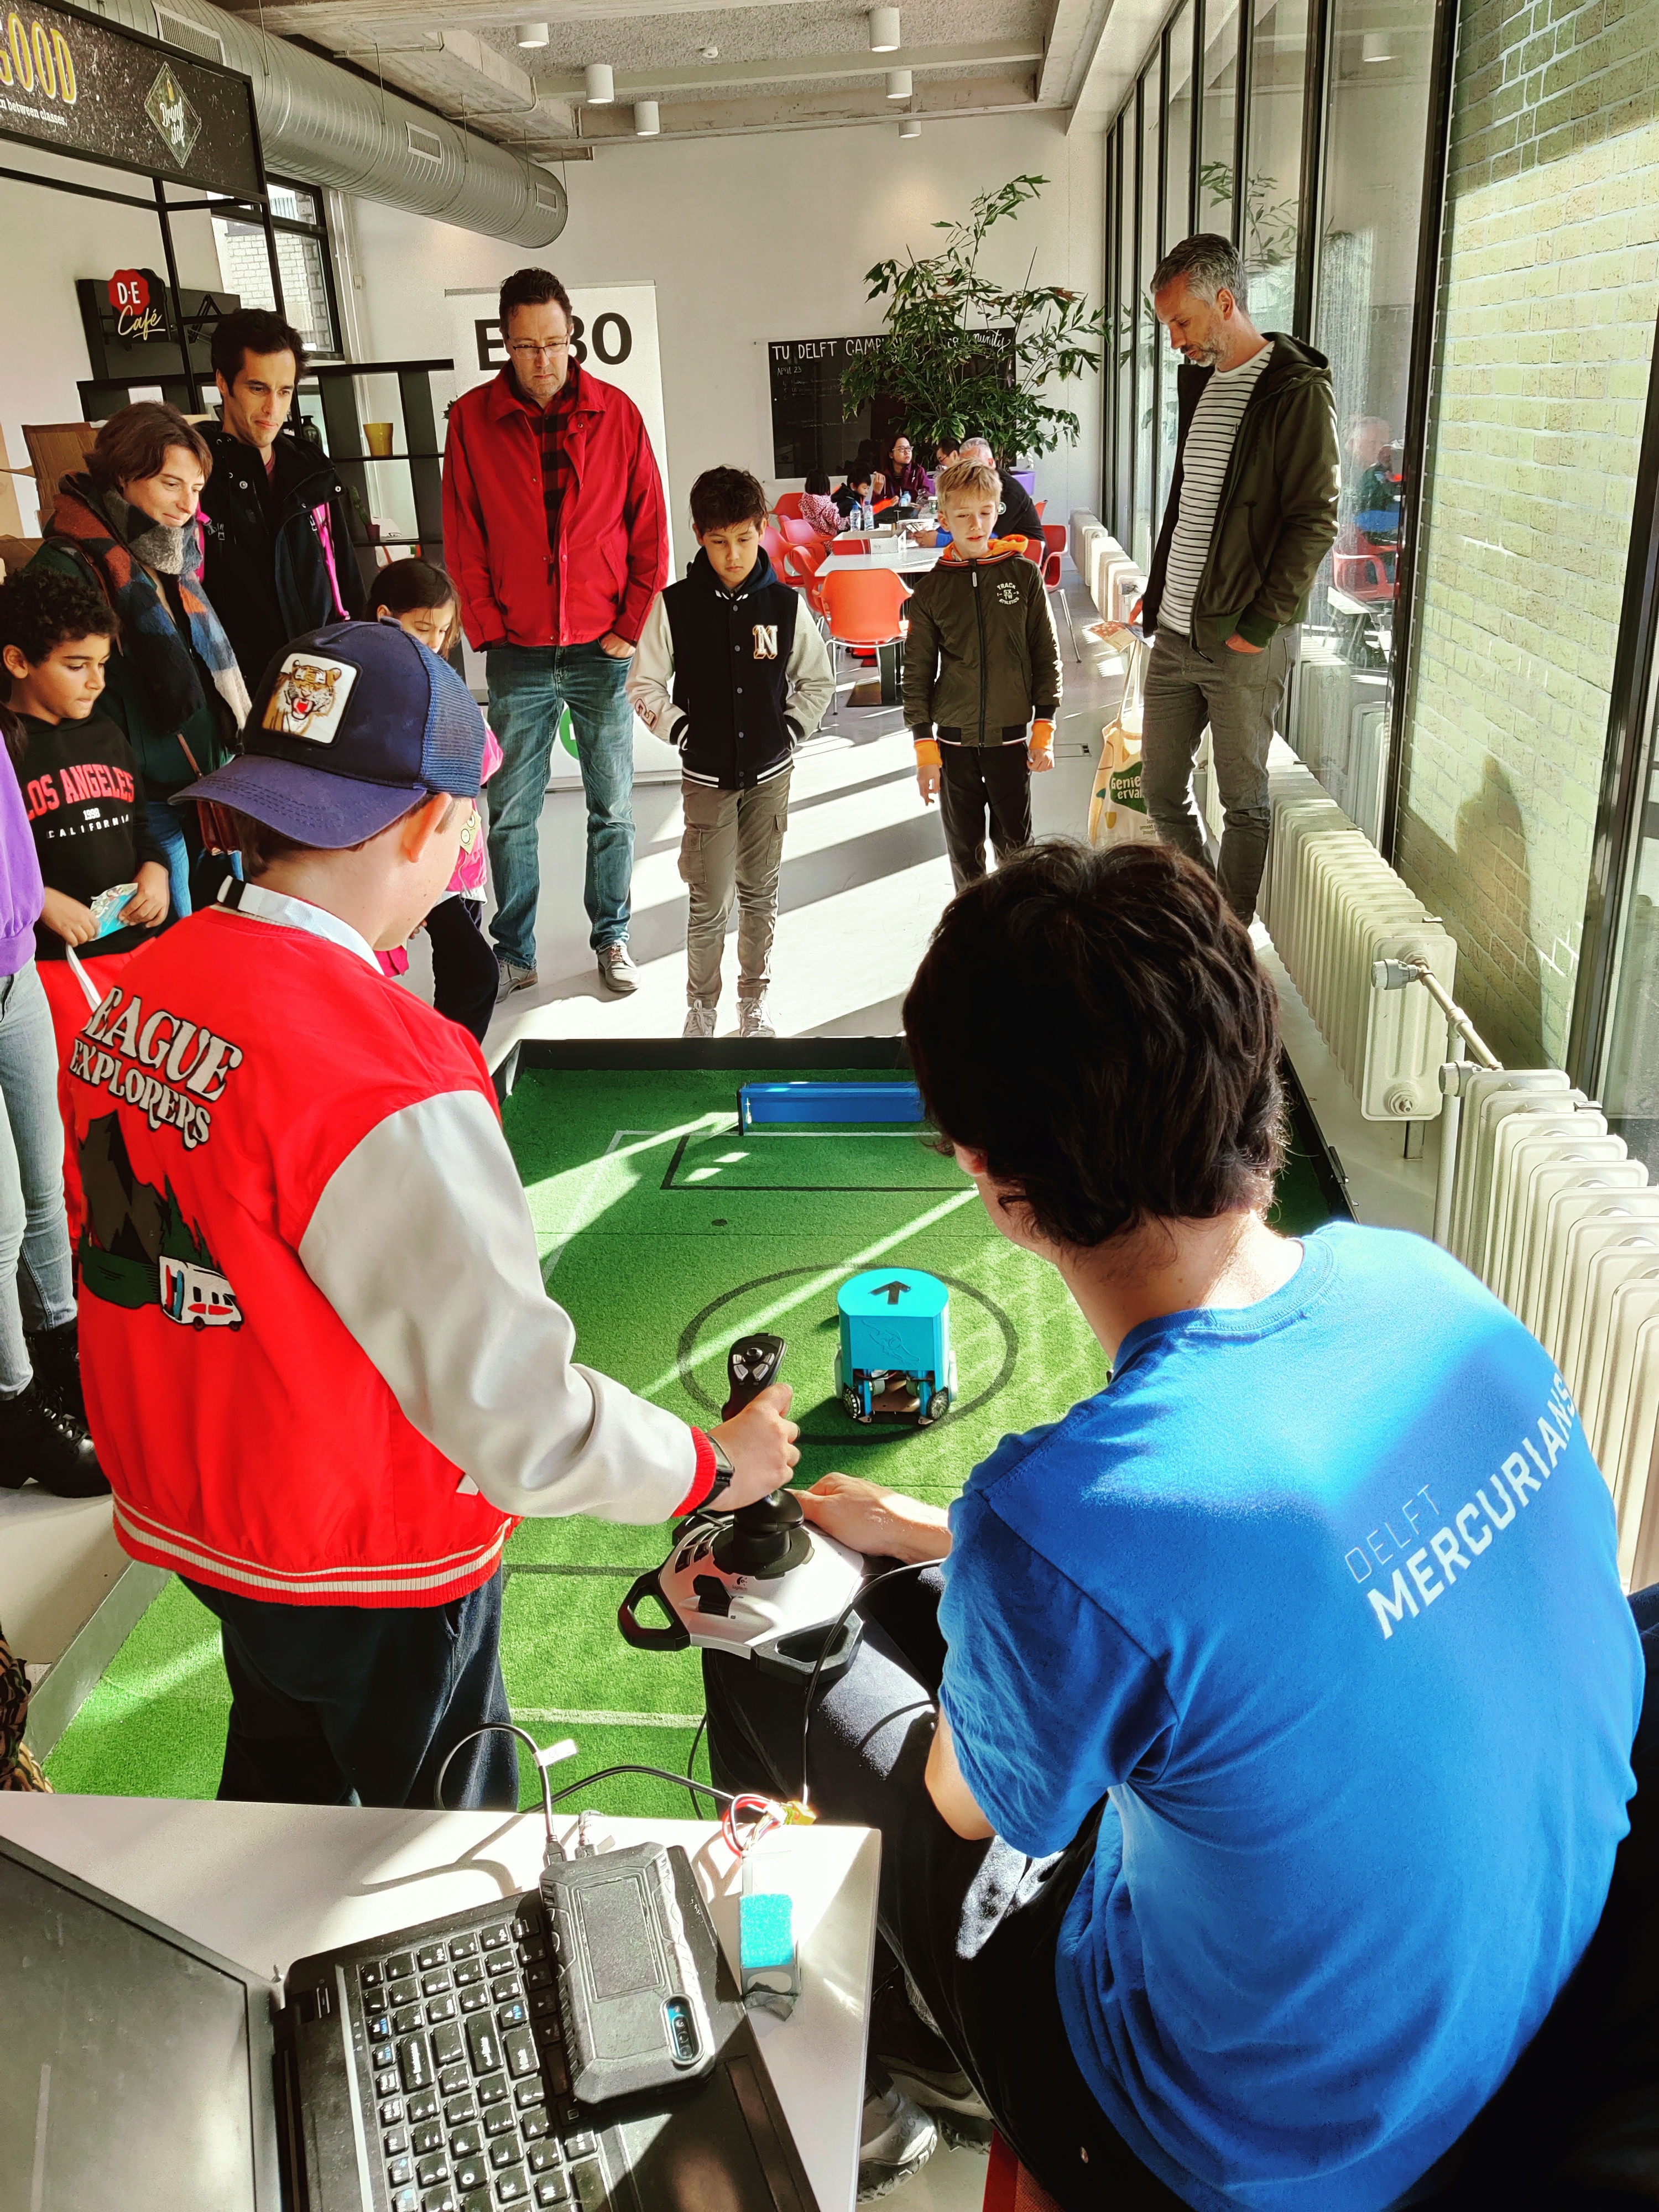 Picture of Thomas instructing the visitors to drive the robot